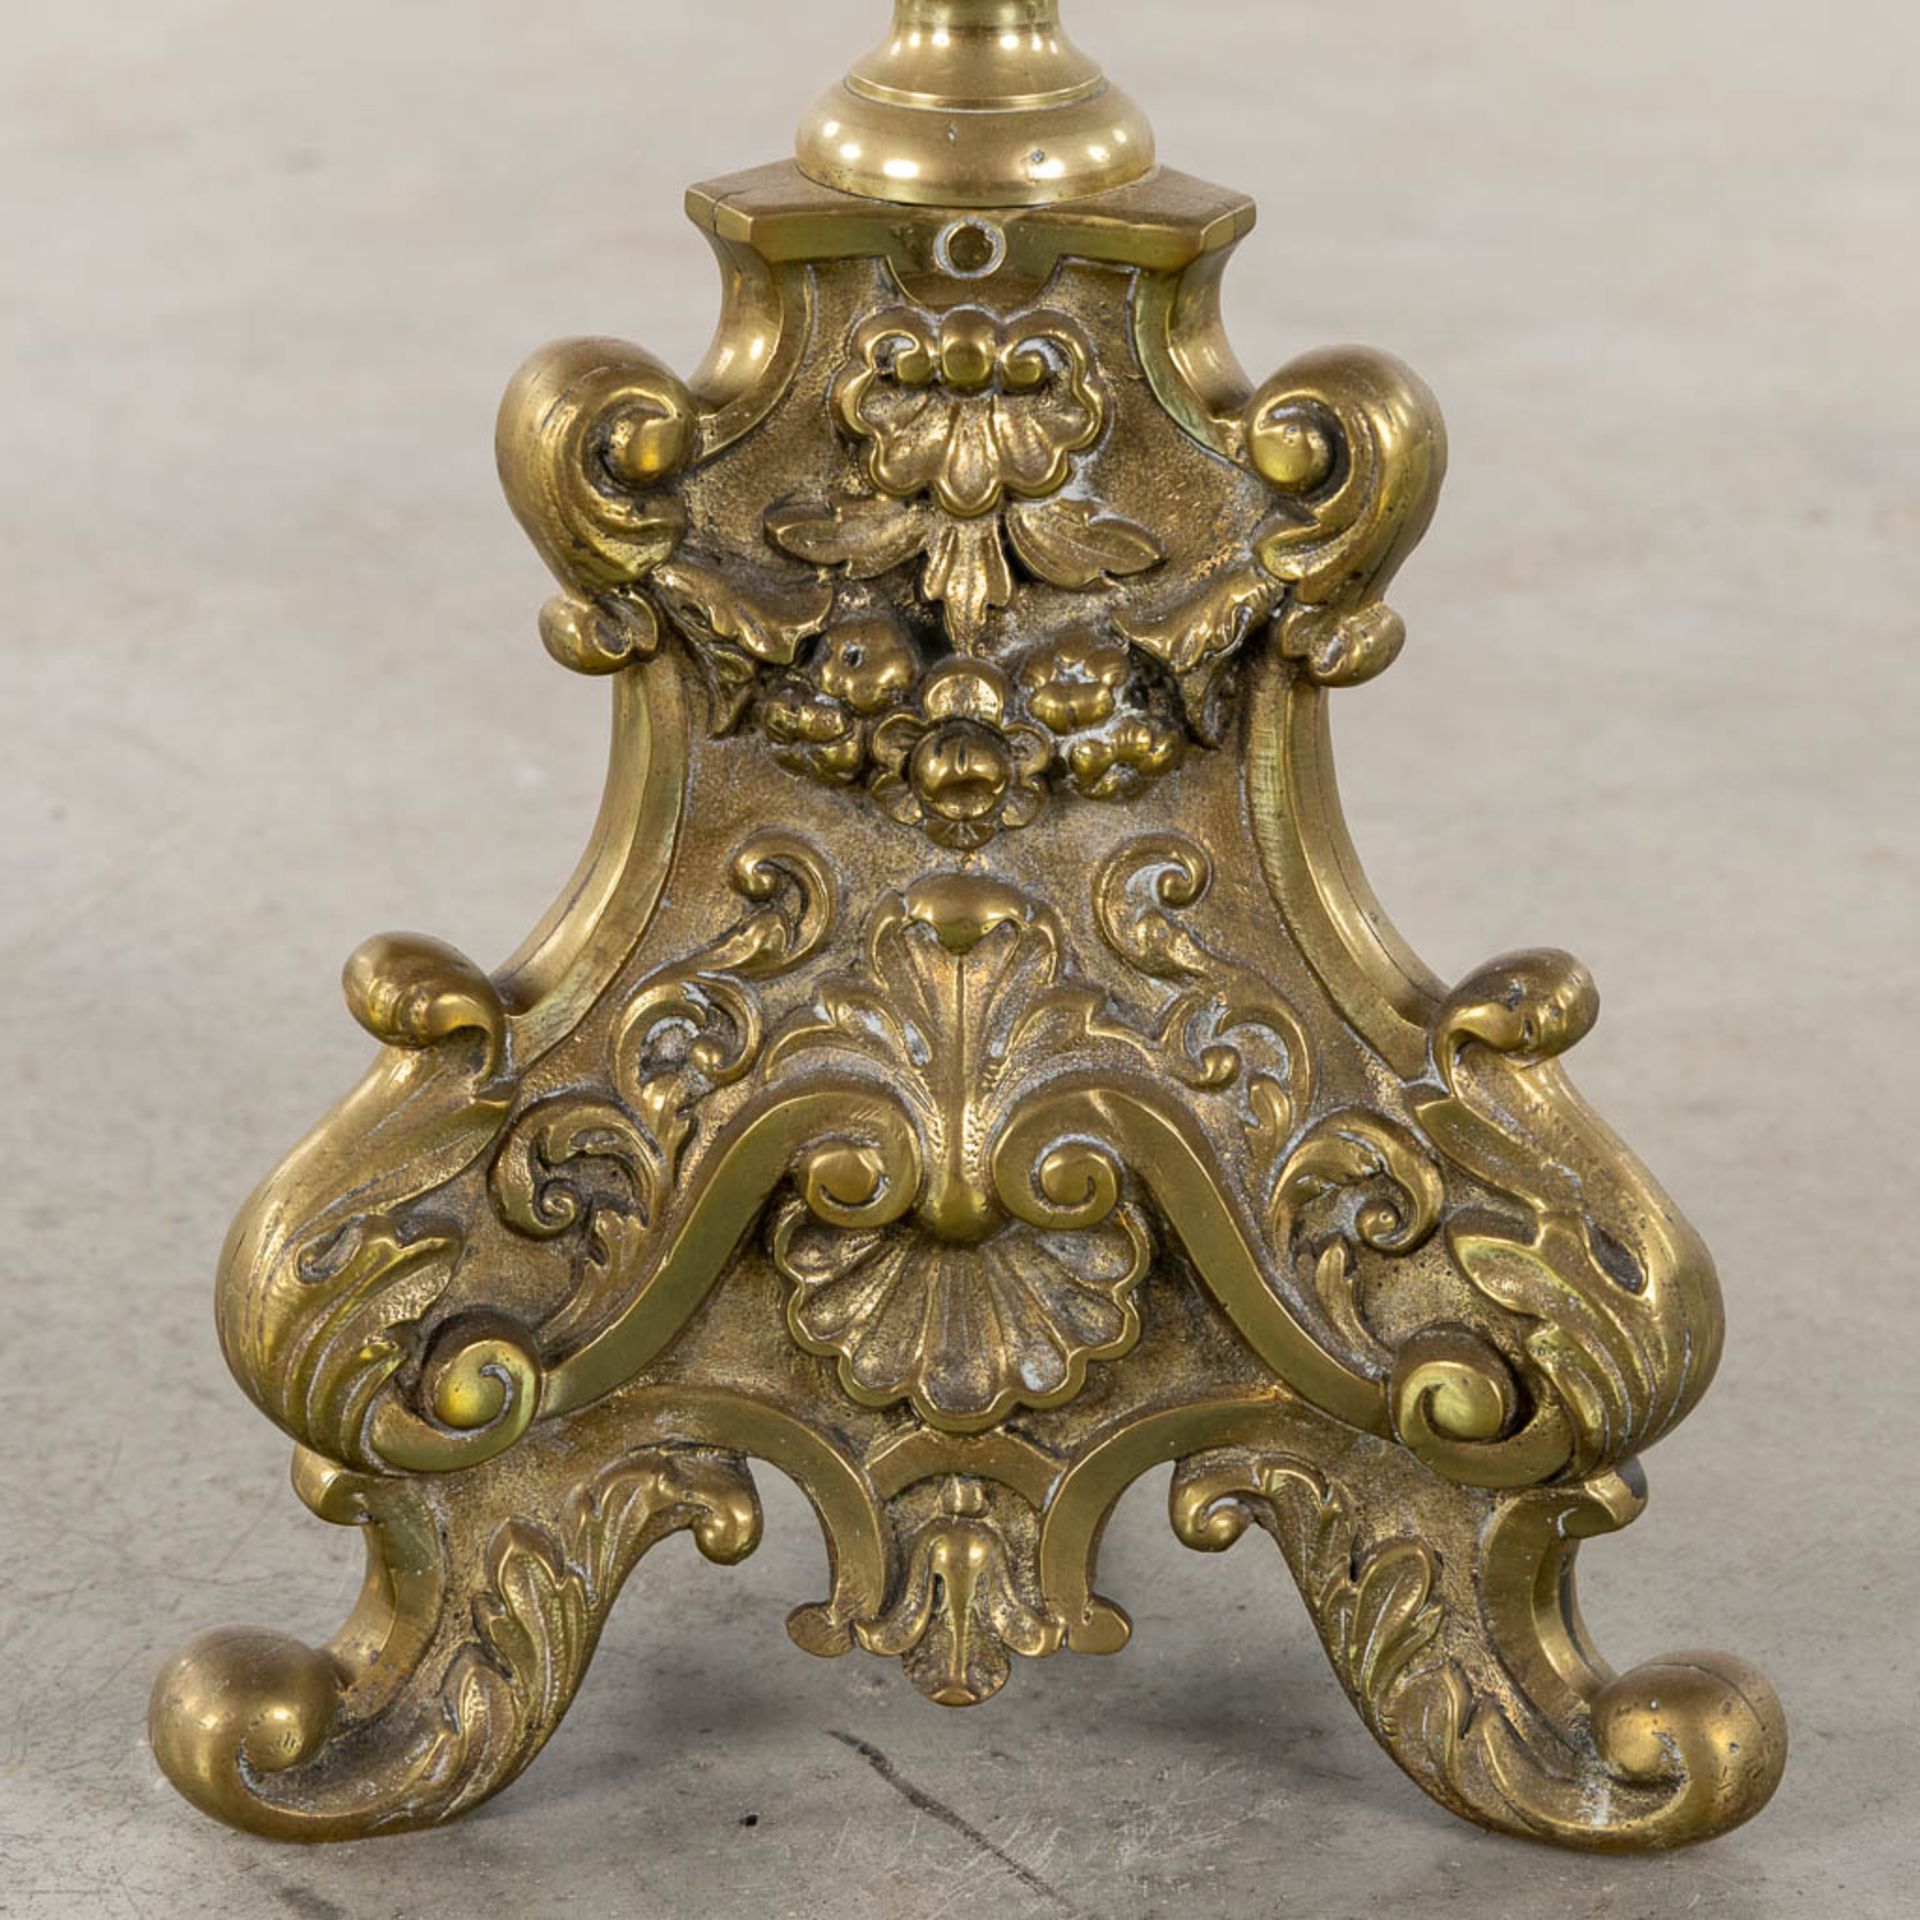 A pair of bronze church candlesticks/candle holders, Louis XV style. Circa 1900. (W:23 x H:105 cm) - Image 15 of 19